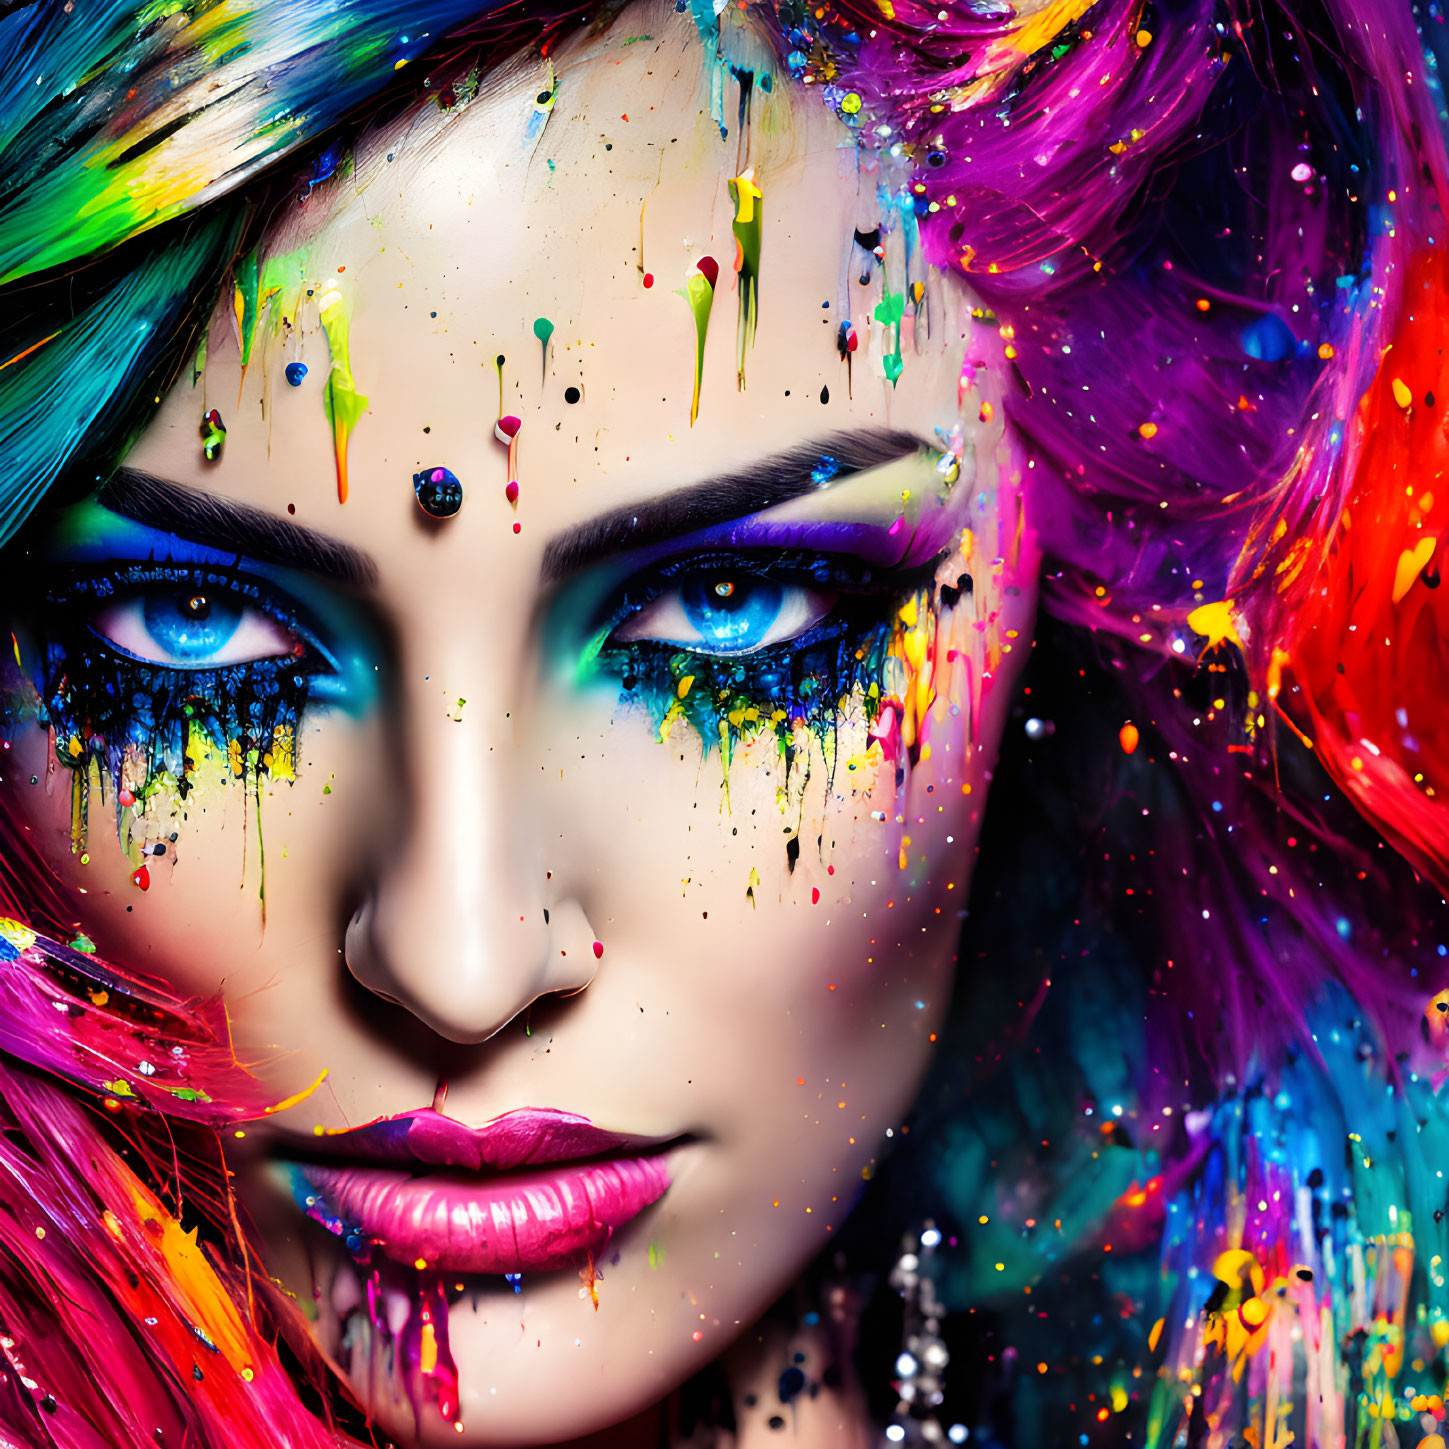 Colorful portrait of woman with multicolored hair and makeup and paint splatters